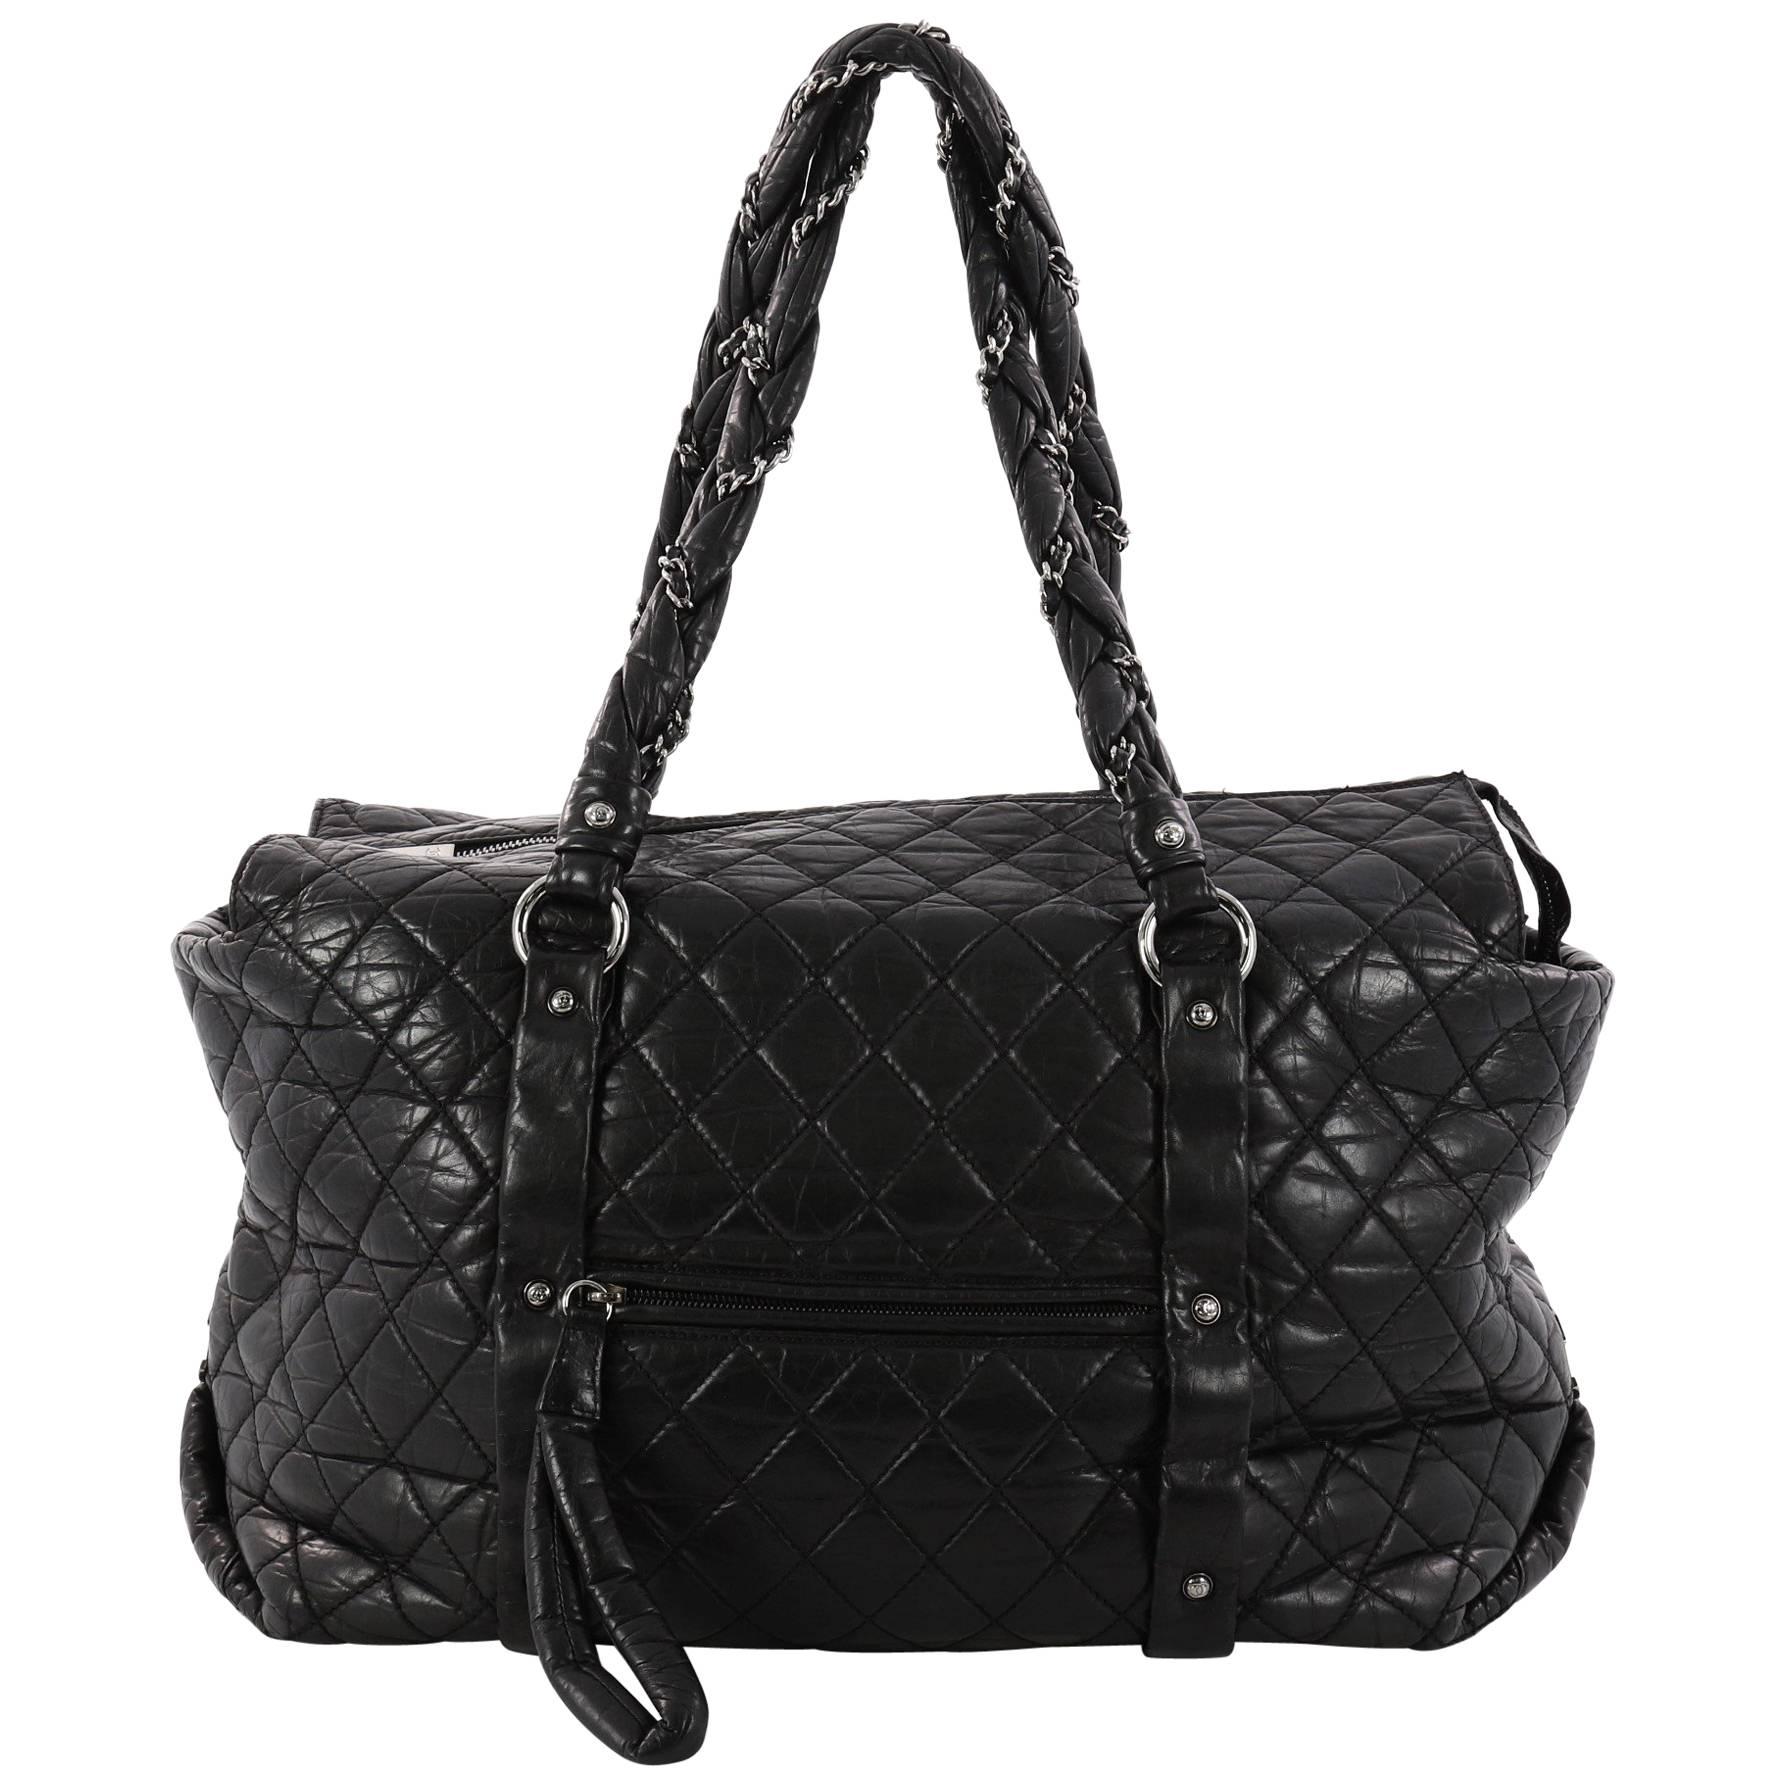 Chanel Ligne Lady Braid Quilted Leather XL Tote 